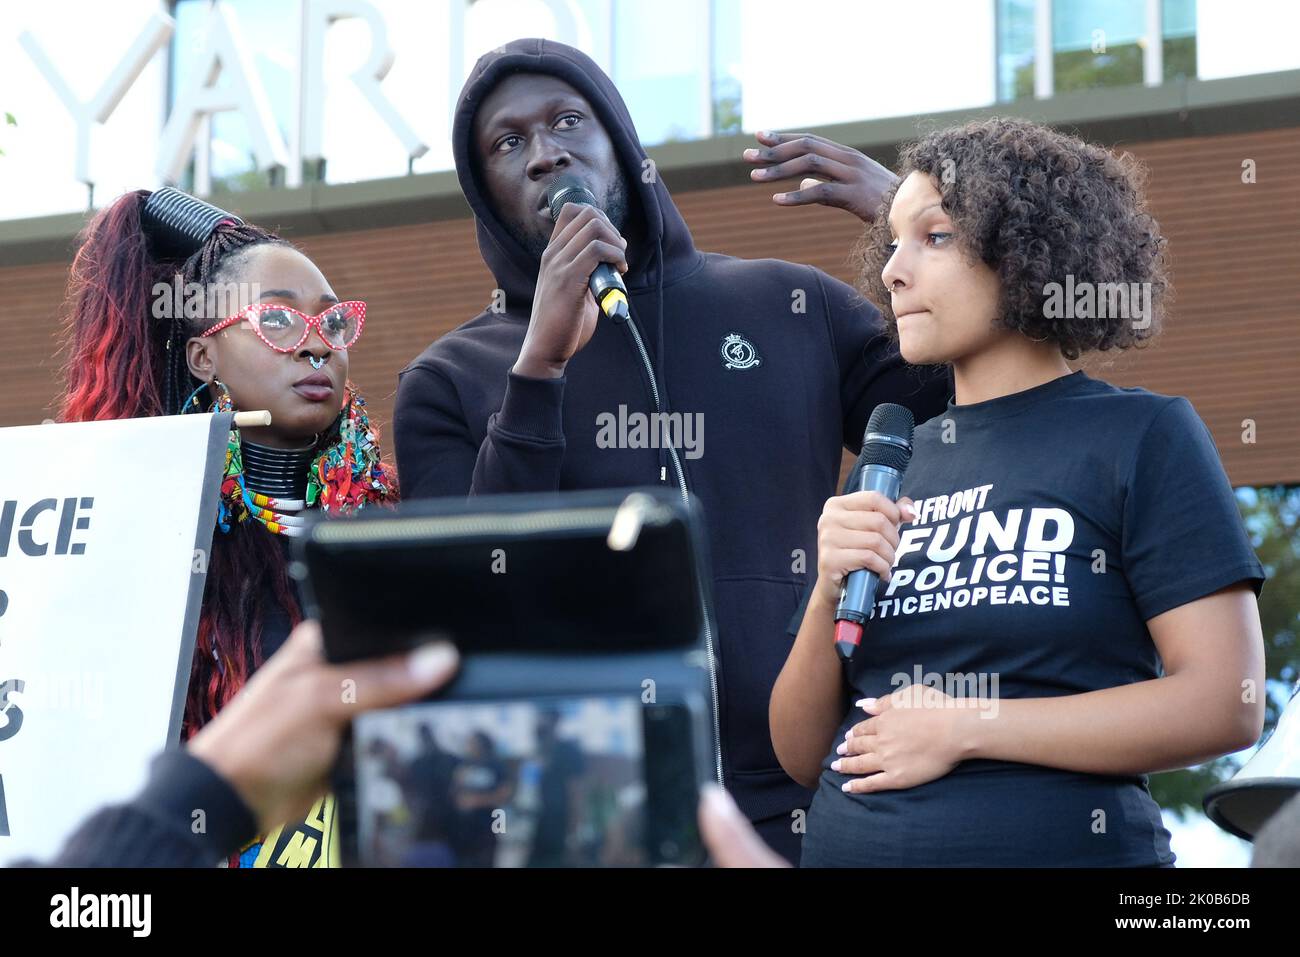 London, UK. 10th September, 2022. Singer Stormzy addresses hundreds of Black Lives Matters protesters outside New Scotland Yard. The demonstrators marched from Parliament Square to the police HQ calling for justice following a fatal shooting of father-to-be Chris Kaba, an unarmed black man, last Monday in sout London by police.  The IOPC are treating the investigation as homicide. Credit: Eleventh Hour Photography/Alamy Live News Stock Photo